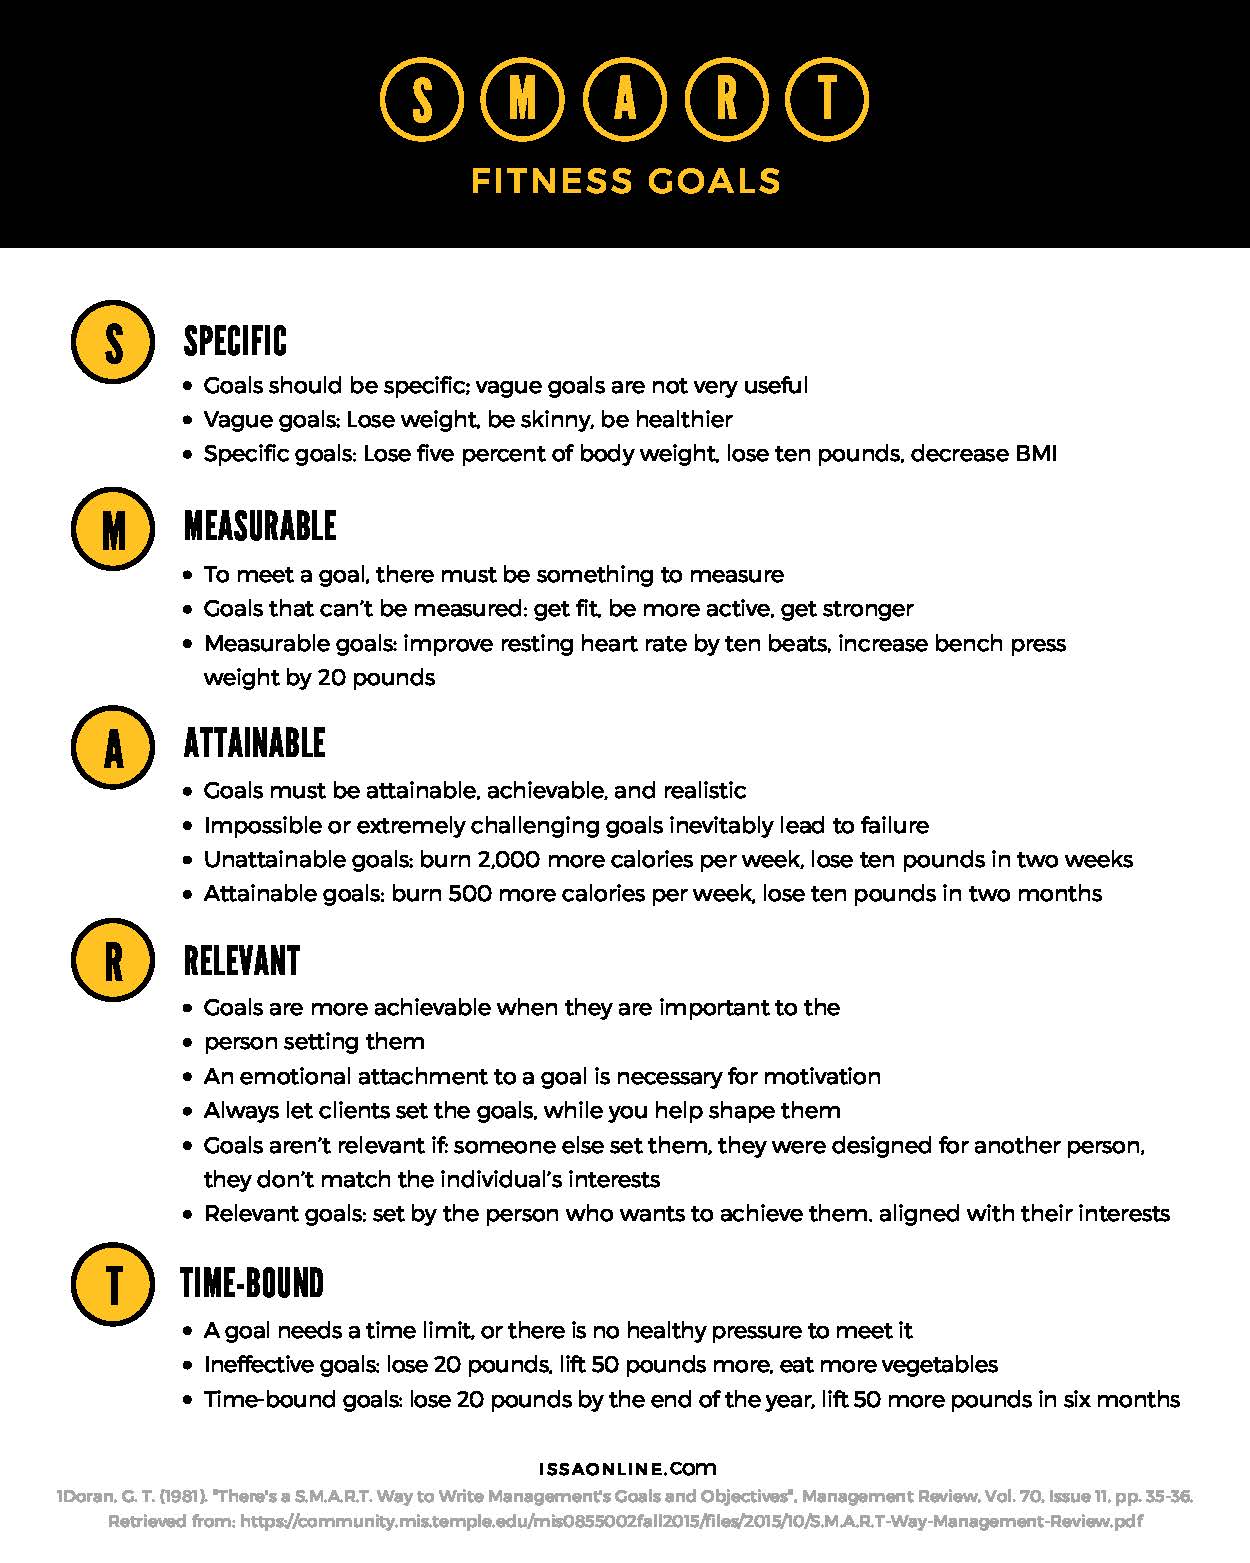 Surprising Benefits Of Fitness Goals: Defining, Setting, And Achieving Success